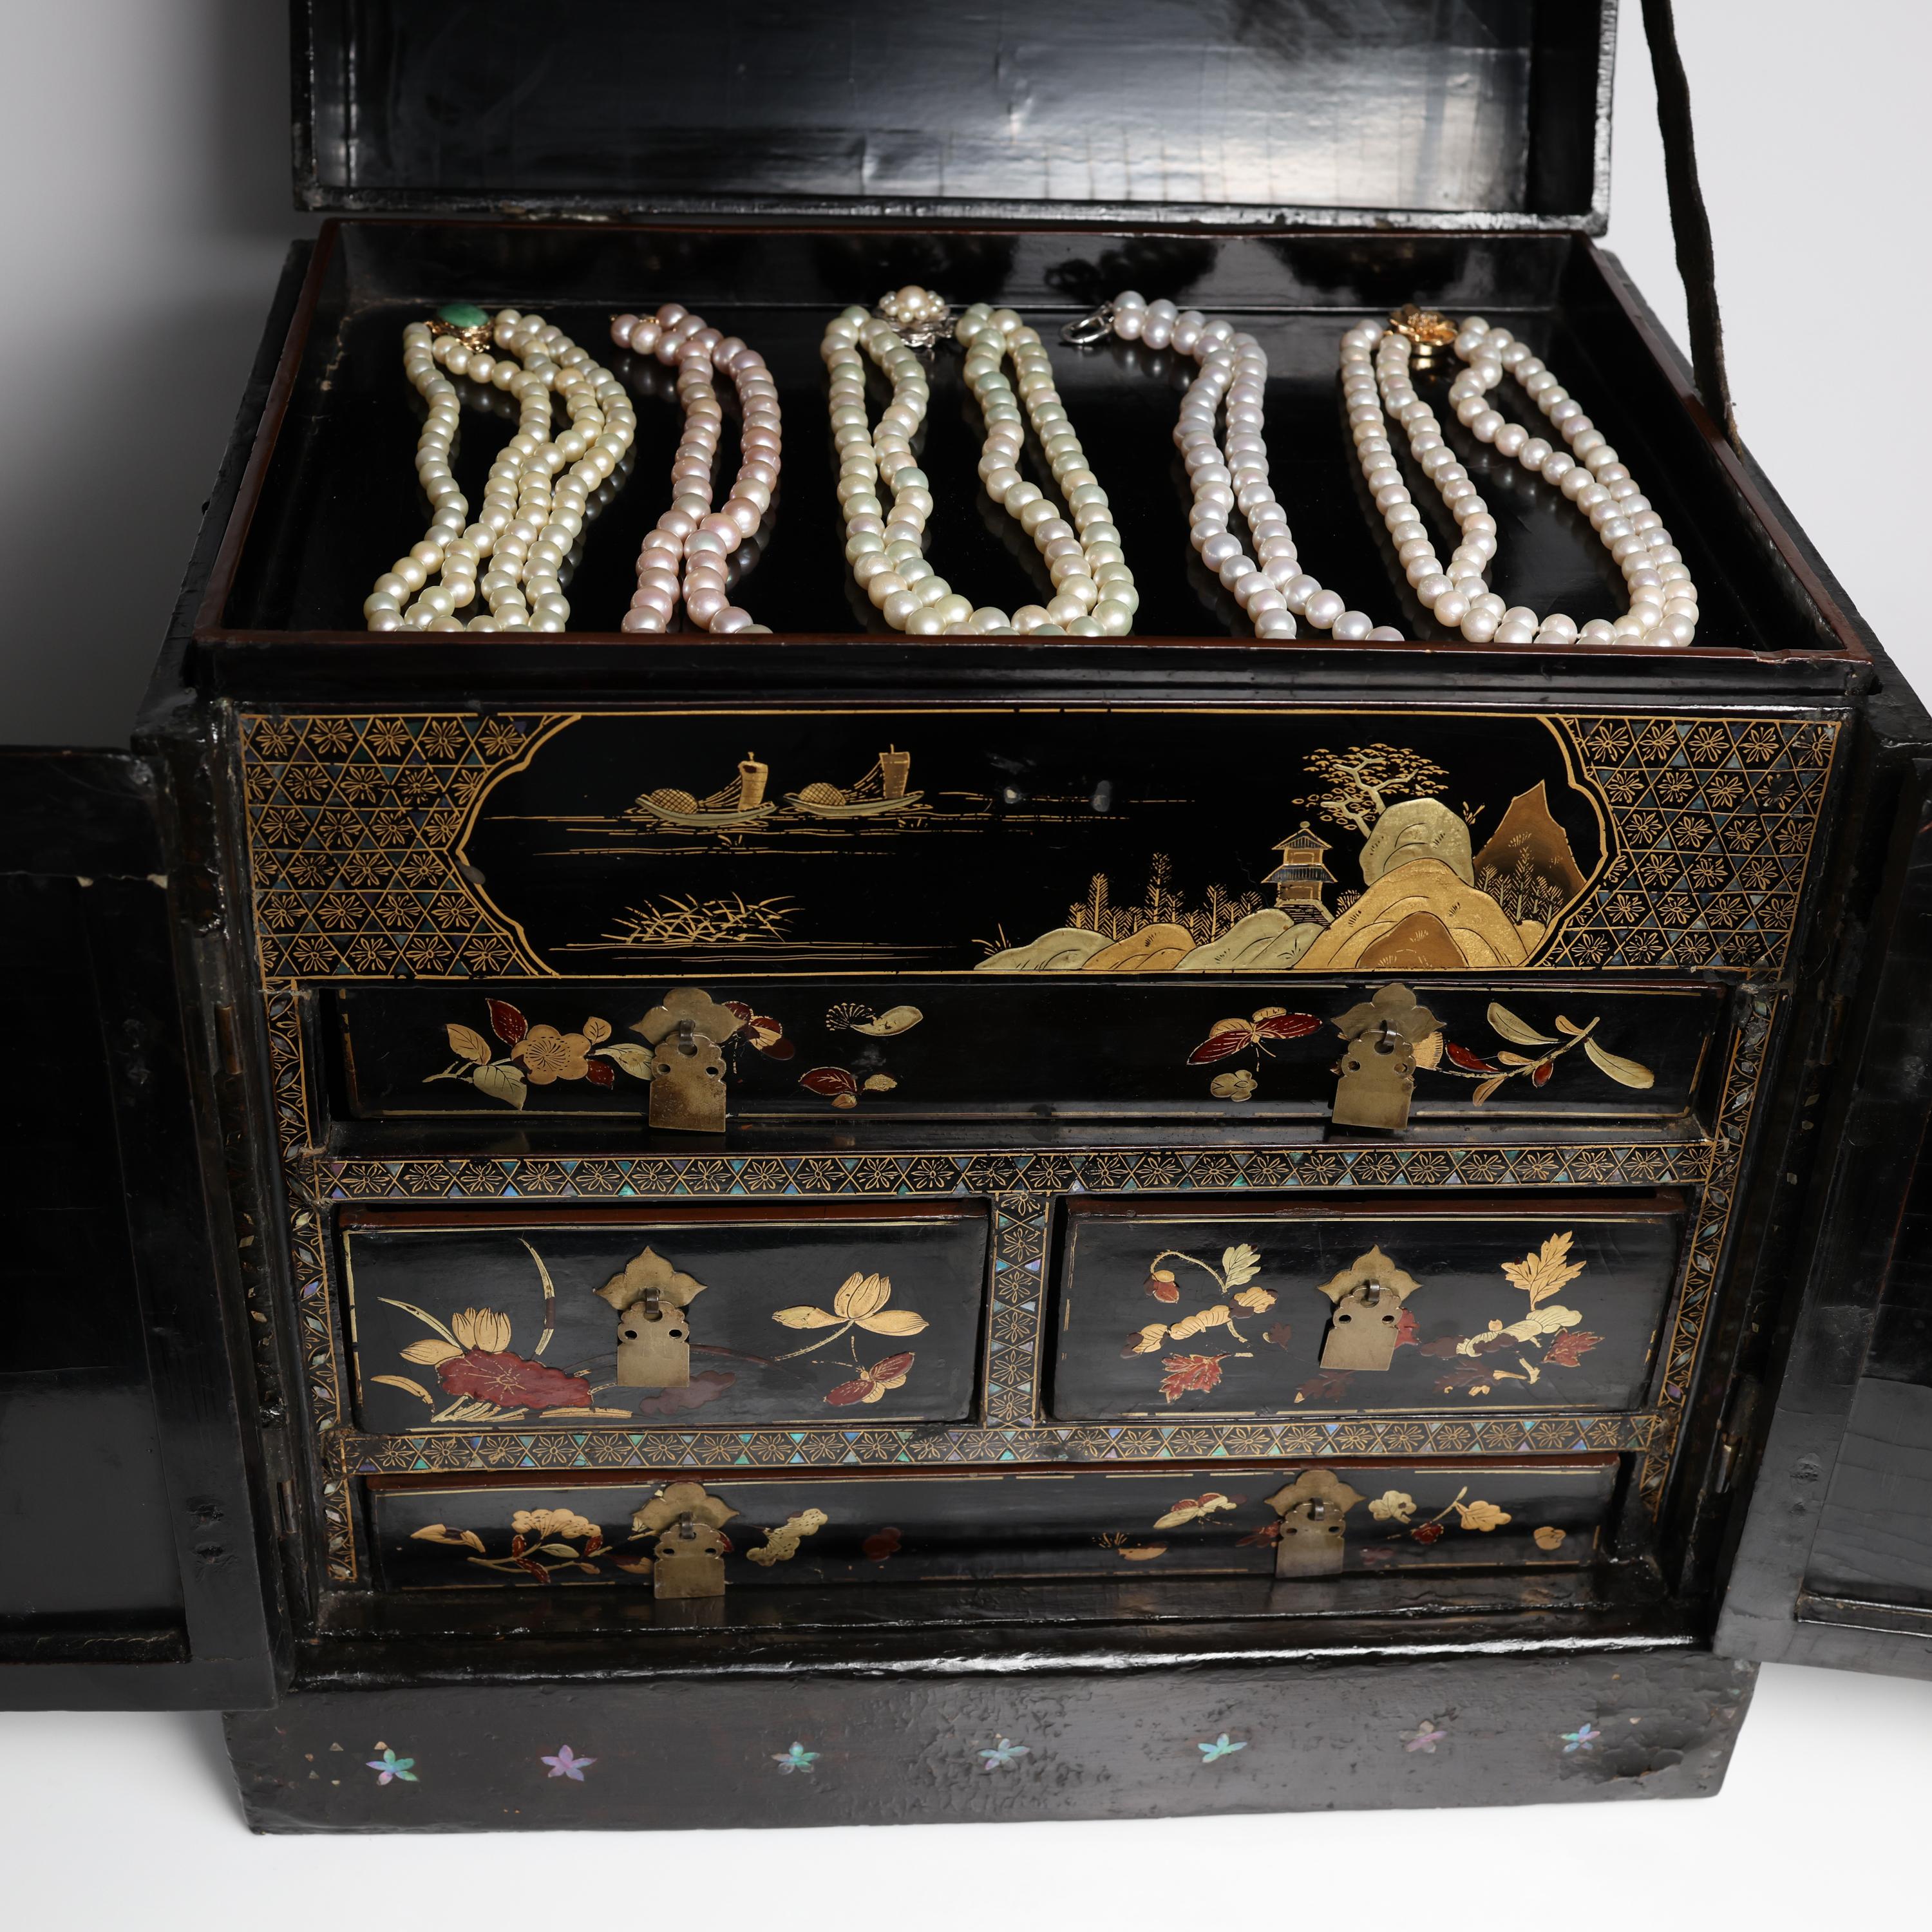 Antique Jewelry Chest Japanese Black Lacquer In Excellent Condition For Sale In Southbury, CT